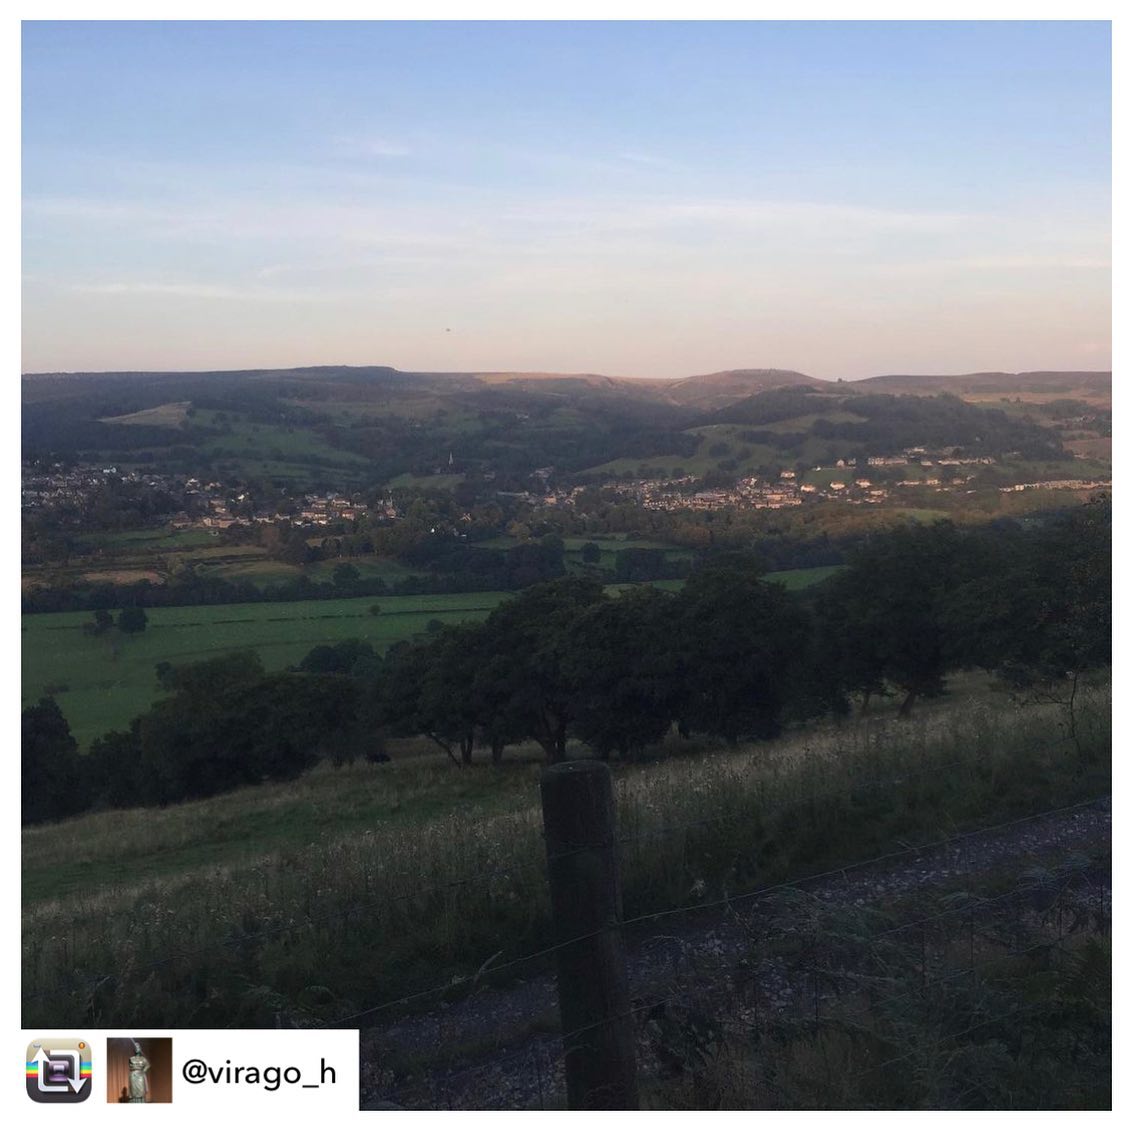 Repost from @virago_h - racing sunset on our 10k Back Before Dark Challenge ⛰🥾⛰

Hope valley 10k ...